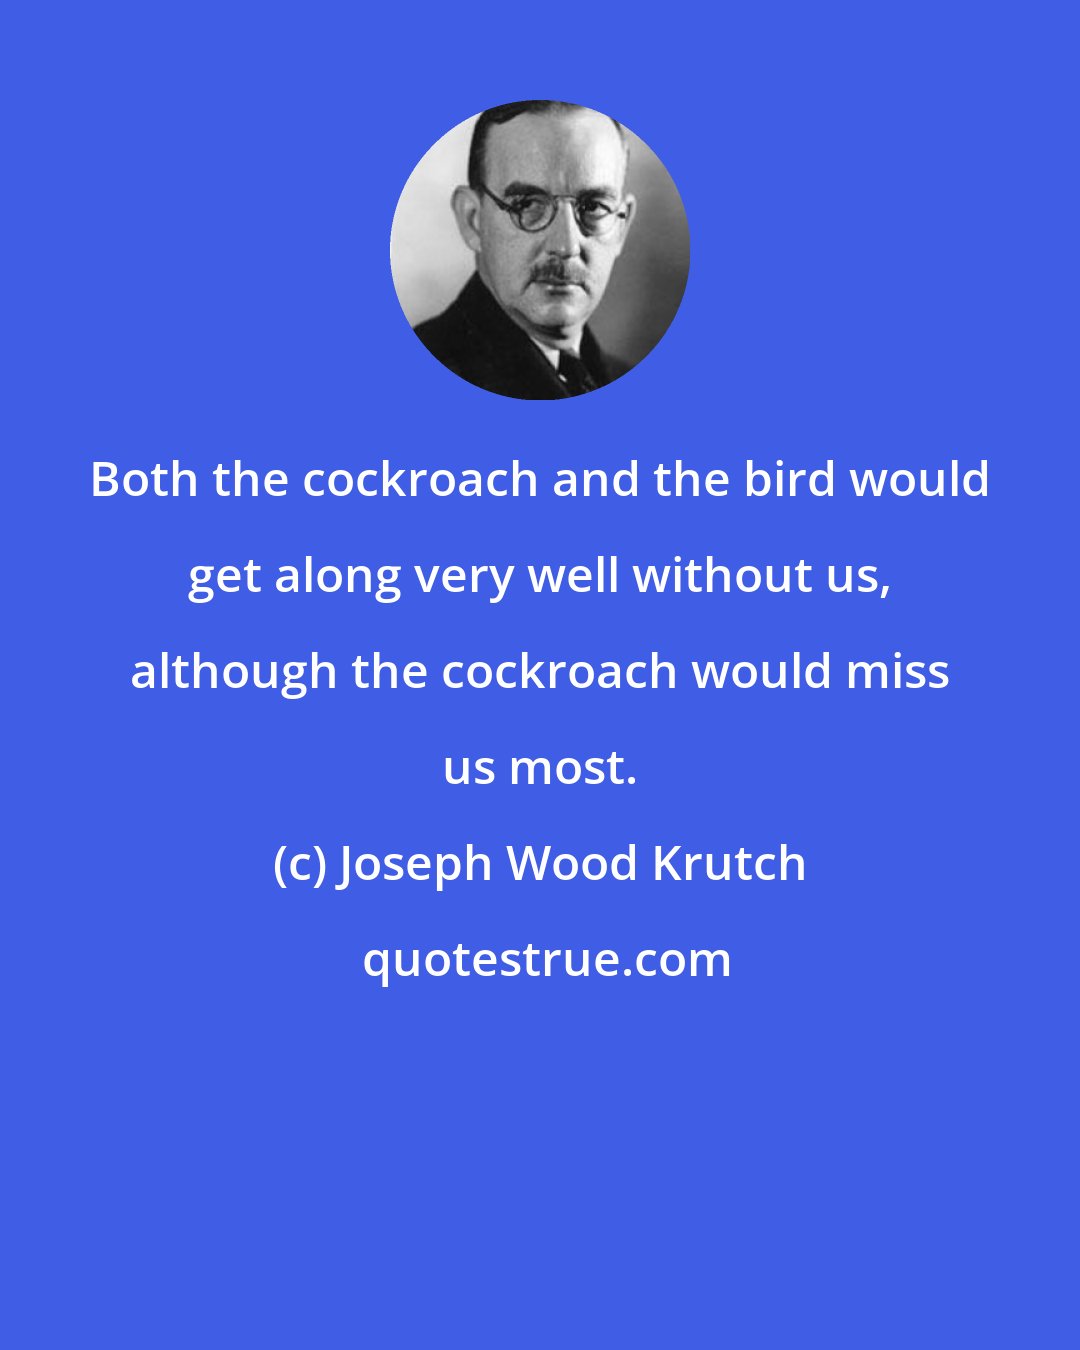 Joseph Wood Krutch: Both the cockroach and the bird would get along very well without us, although the cockroach would miss us most.